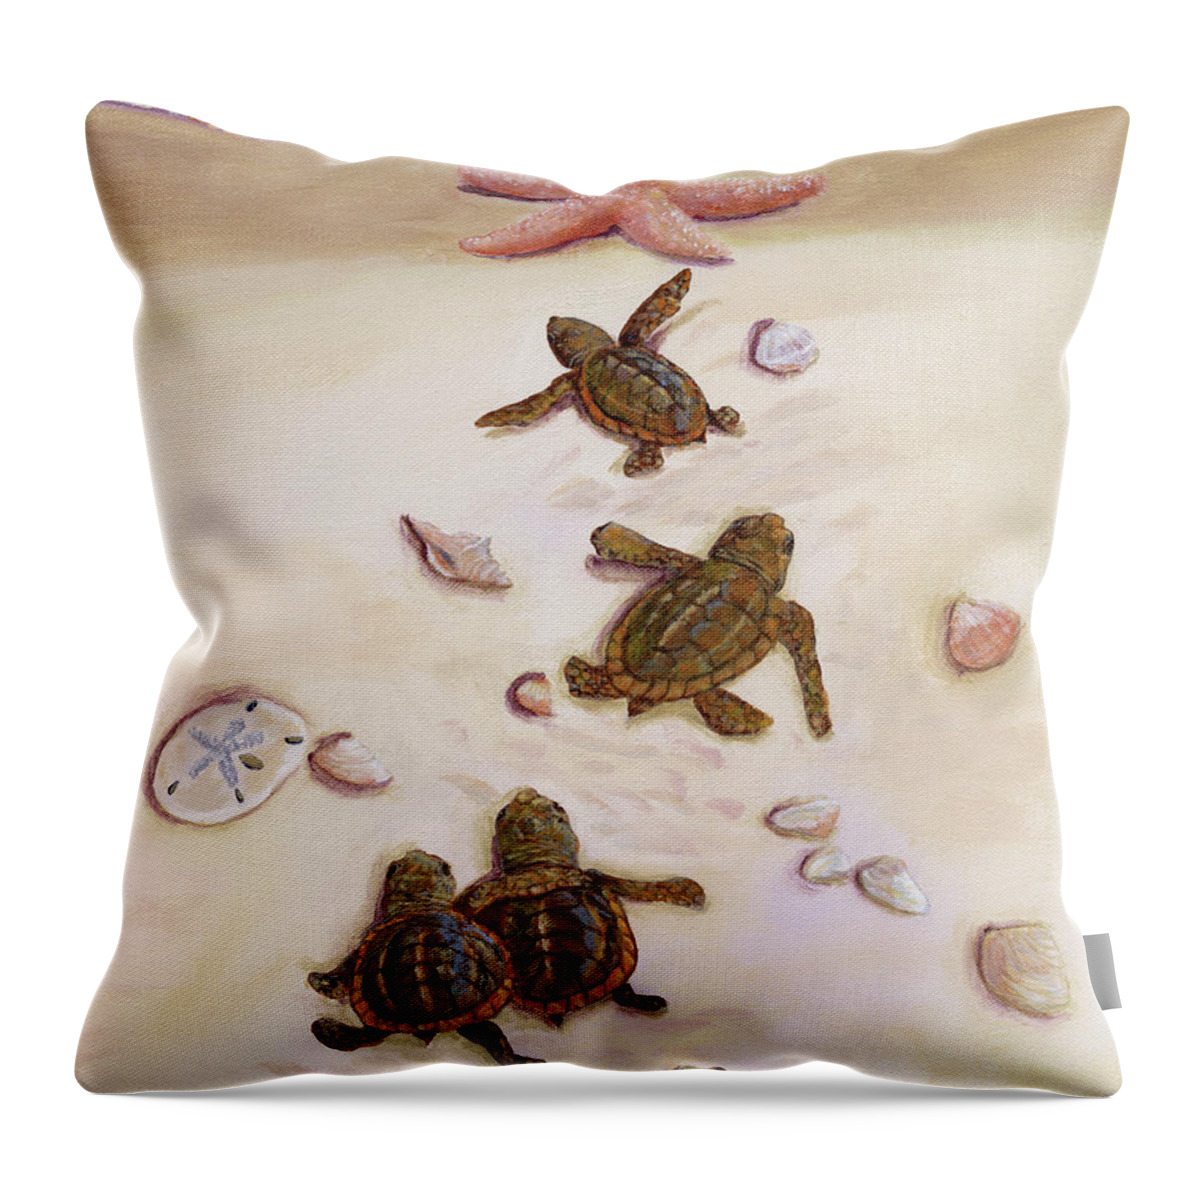 Sea Turtles Throw Pillow featuring the painting Turtle Christmas Tree by Donna Tucker